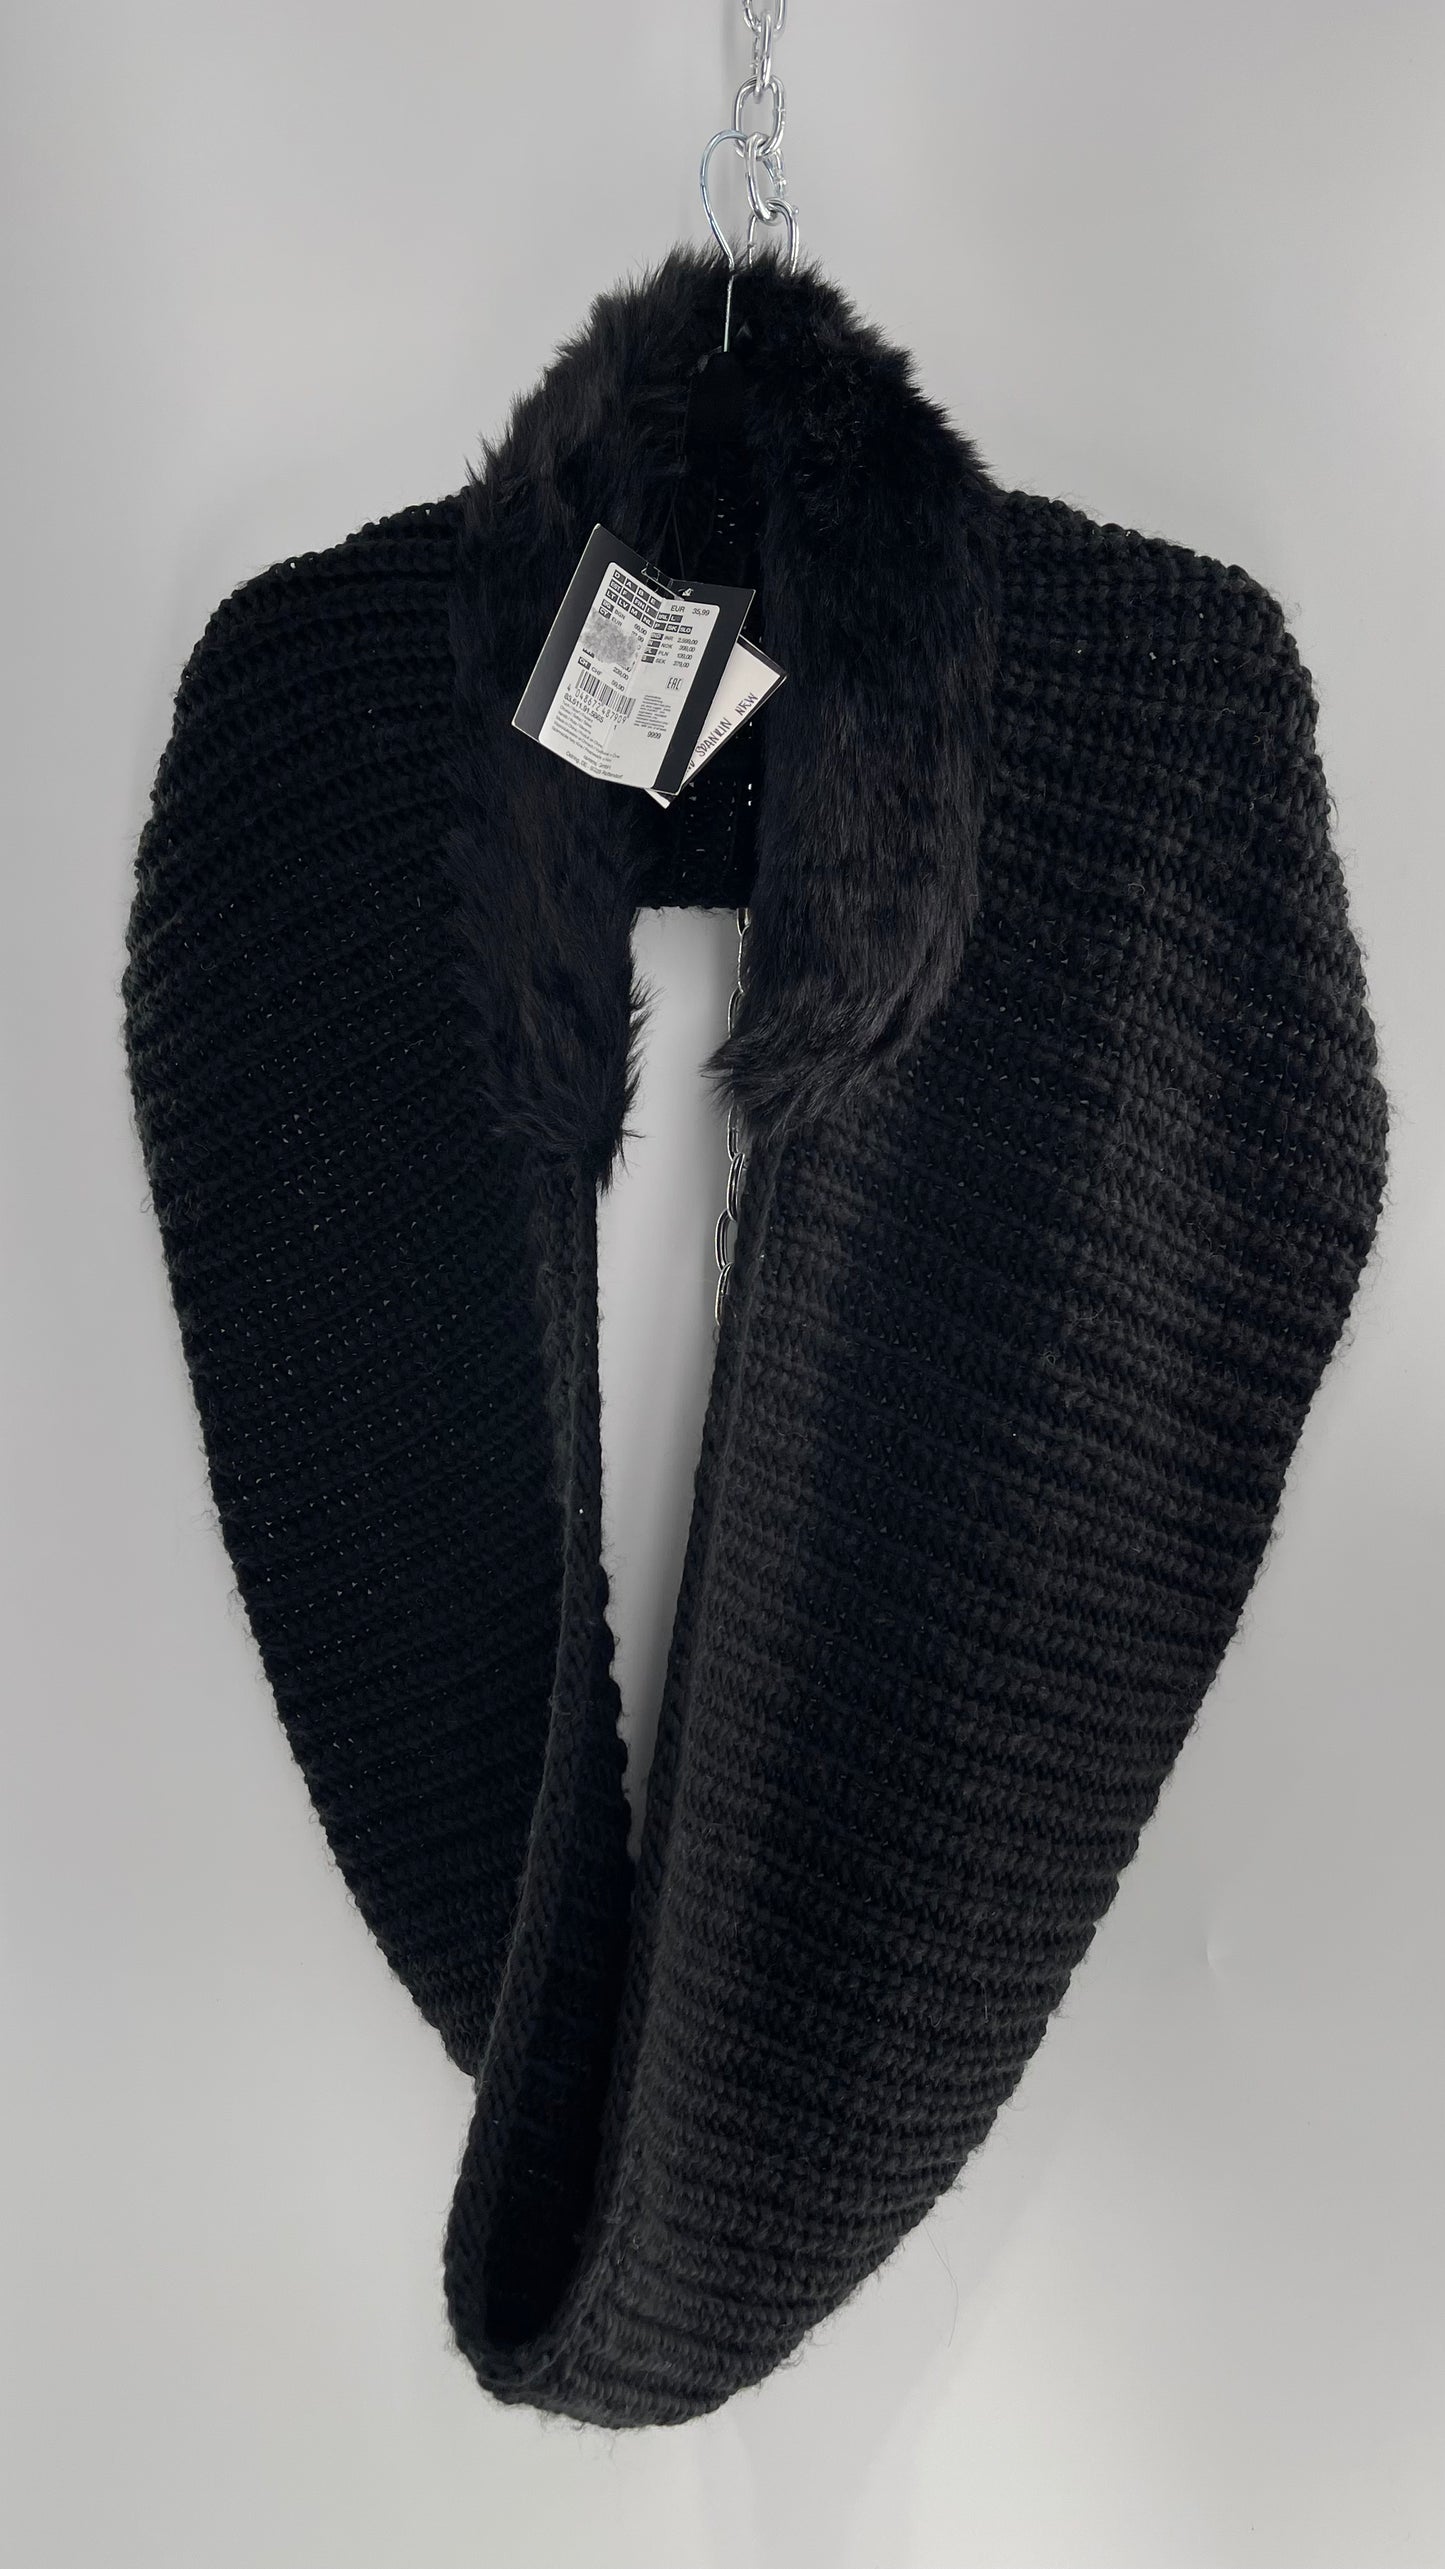 Comma Black Knit Infinity Scarf with Fur Trim Collar and Tags Attached